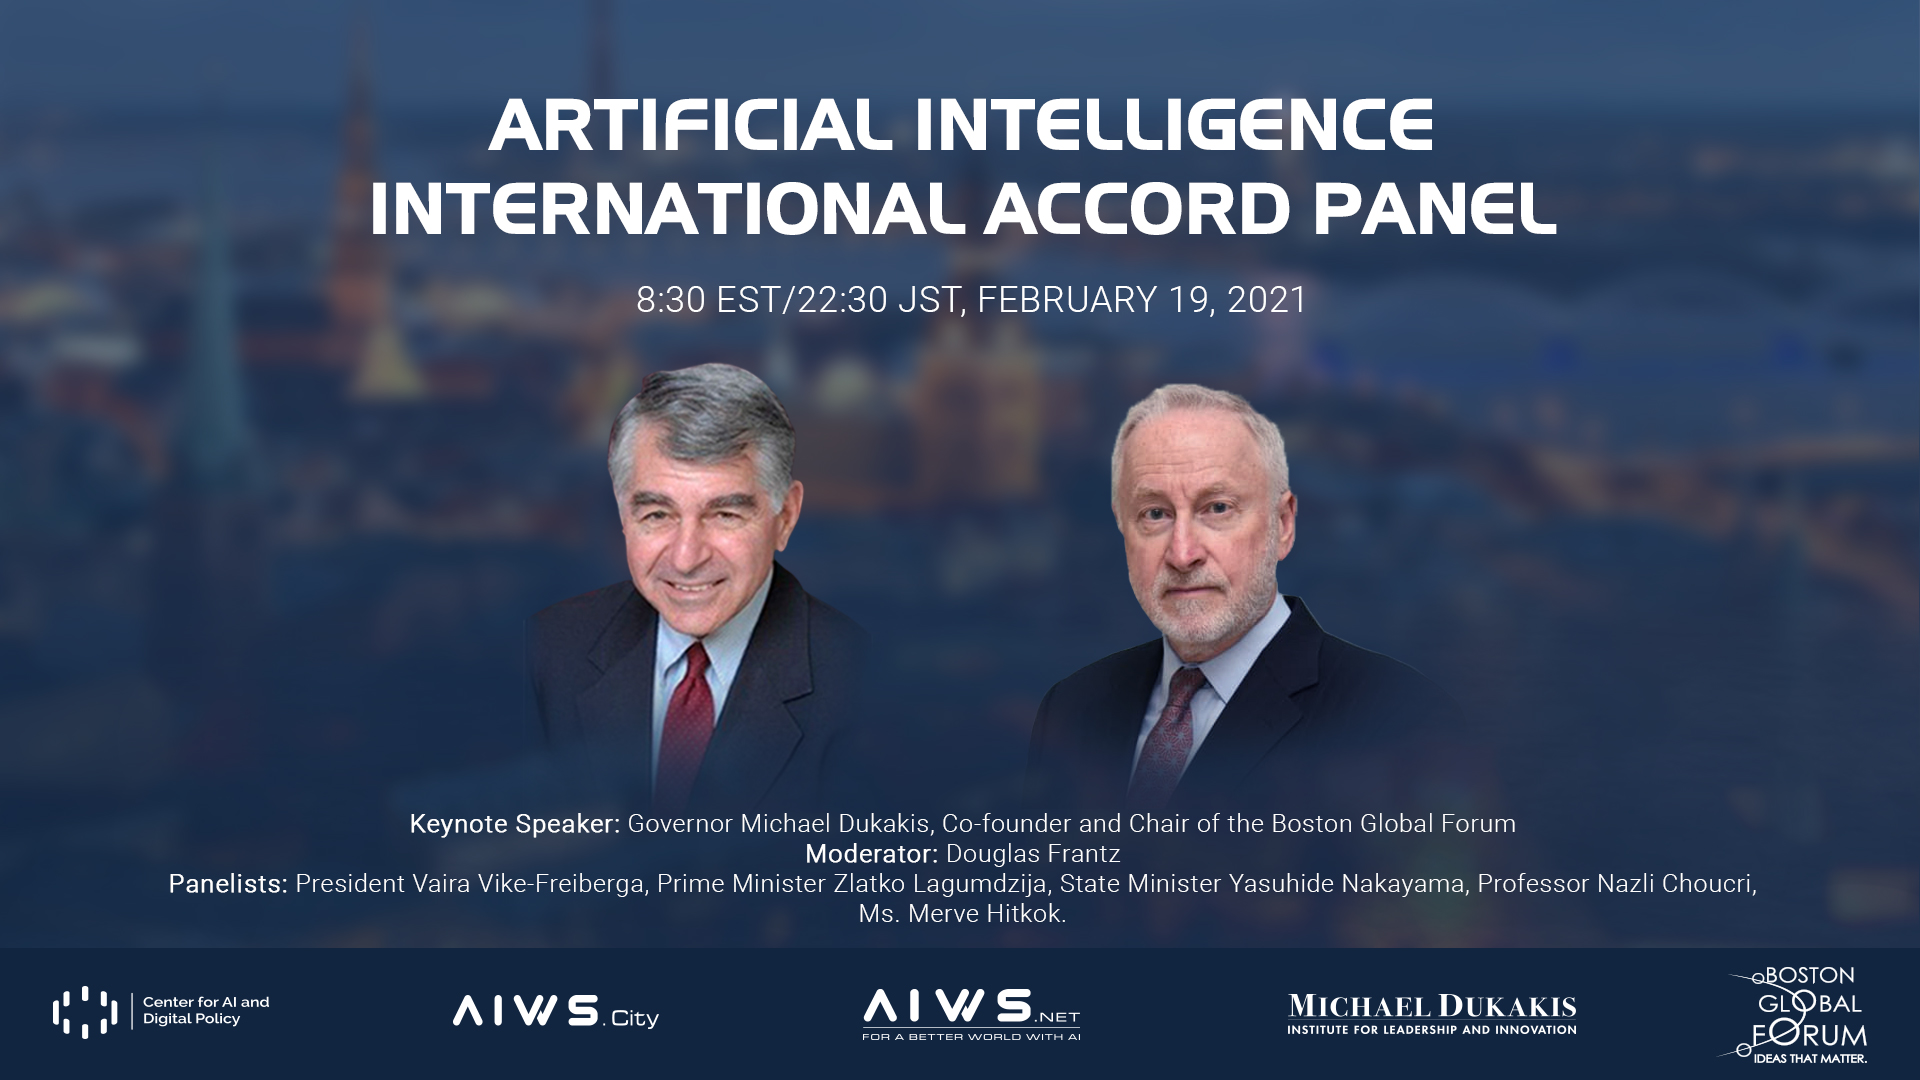 The Artificial Intelligence International Accord Panel